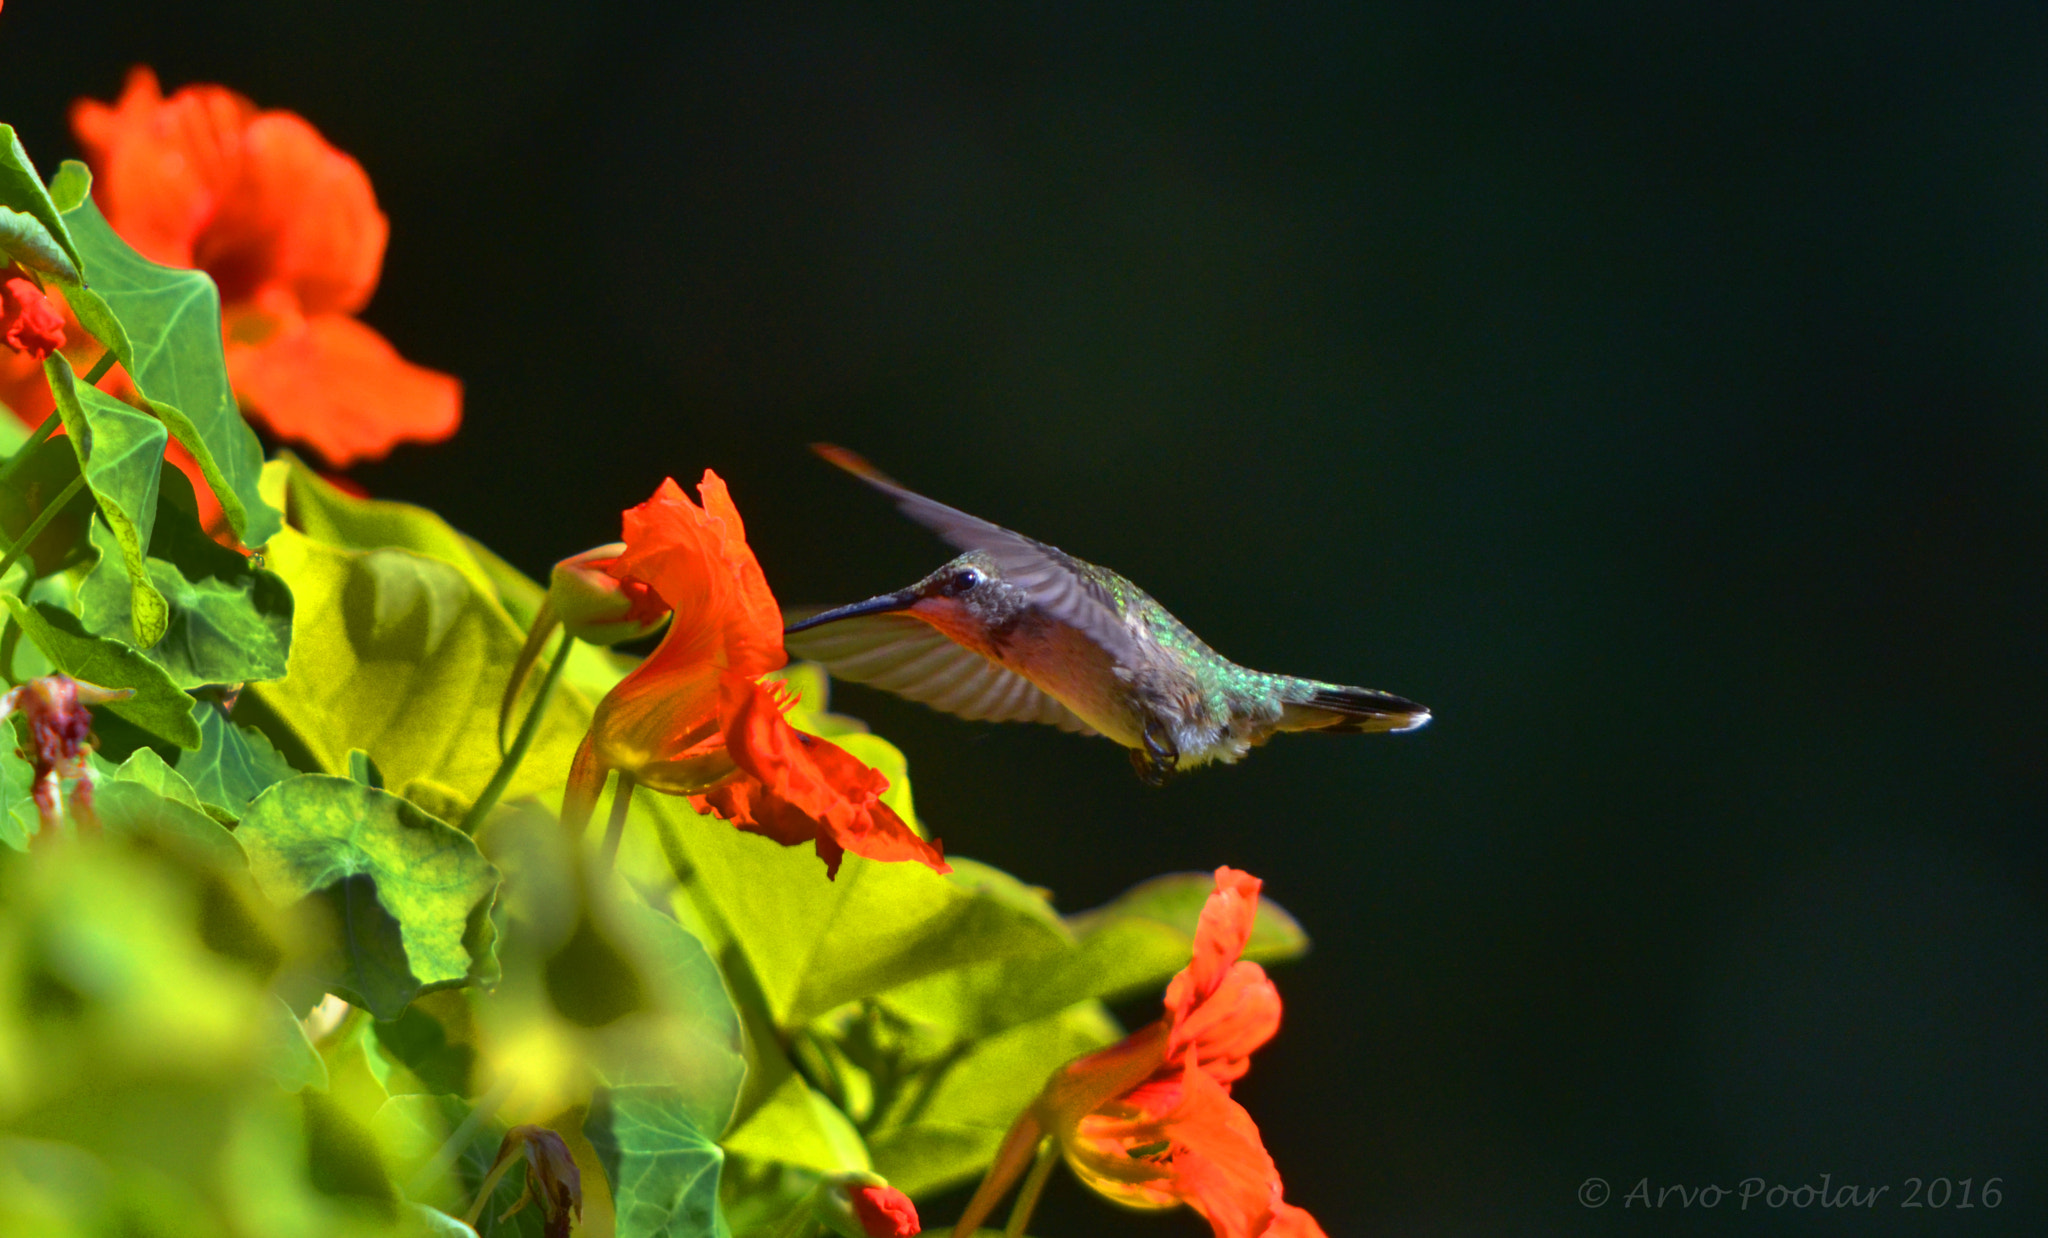 Nikon D7000 sample photo. Hummer and flowers photography